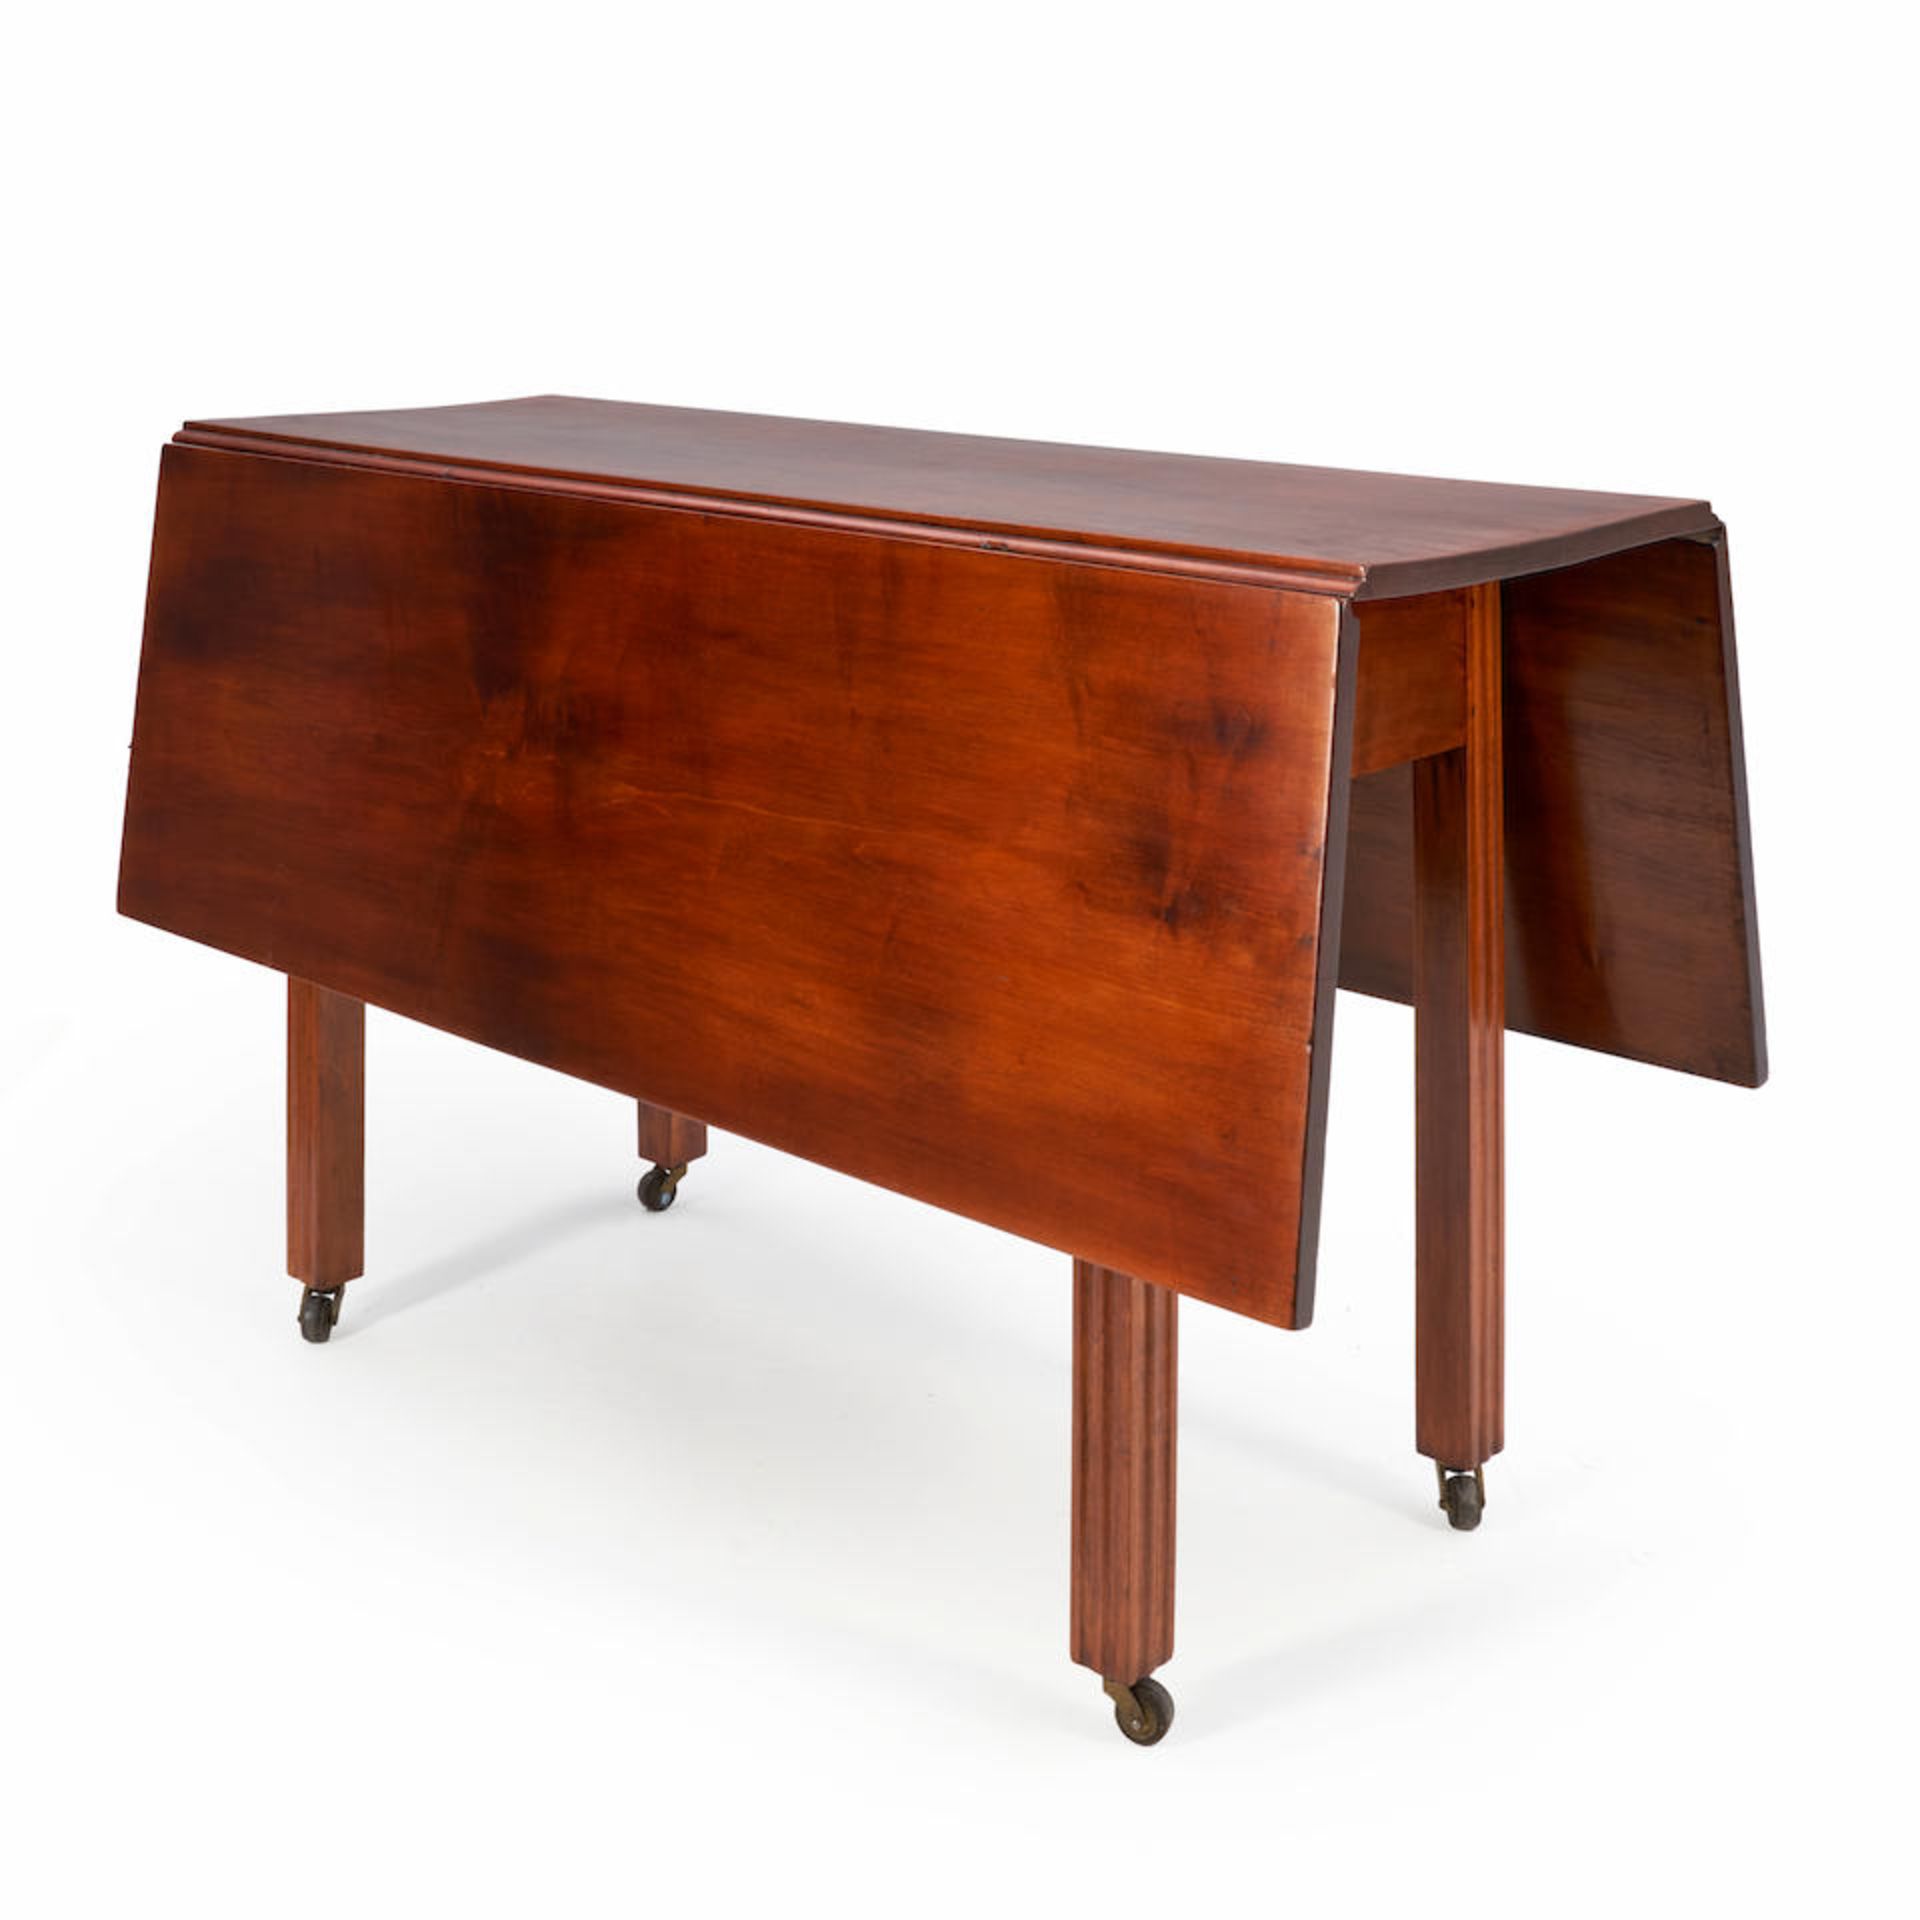 CHIPPENDALE-STYLE CHERRY DROP LEAF TABLE